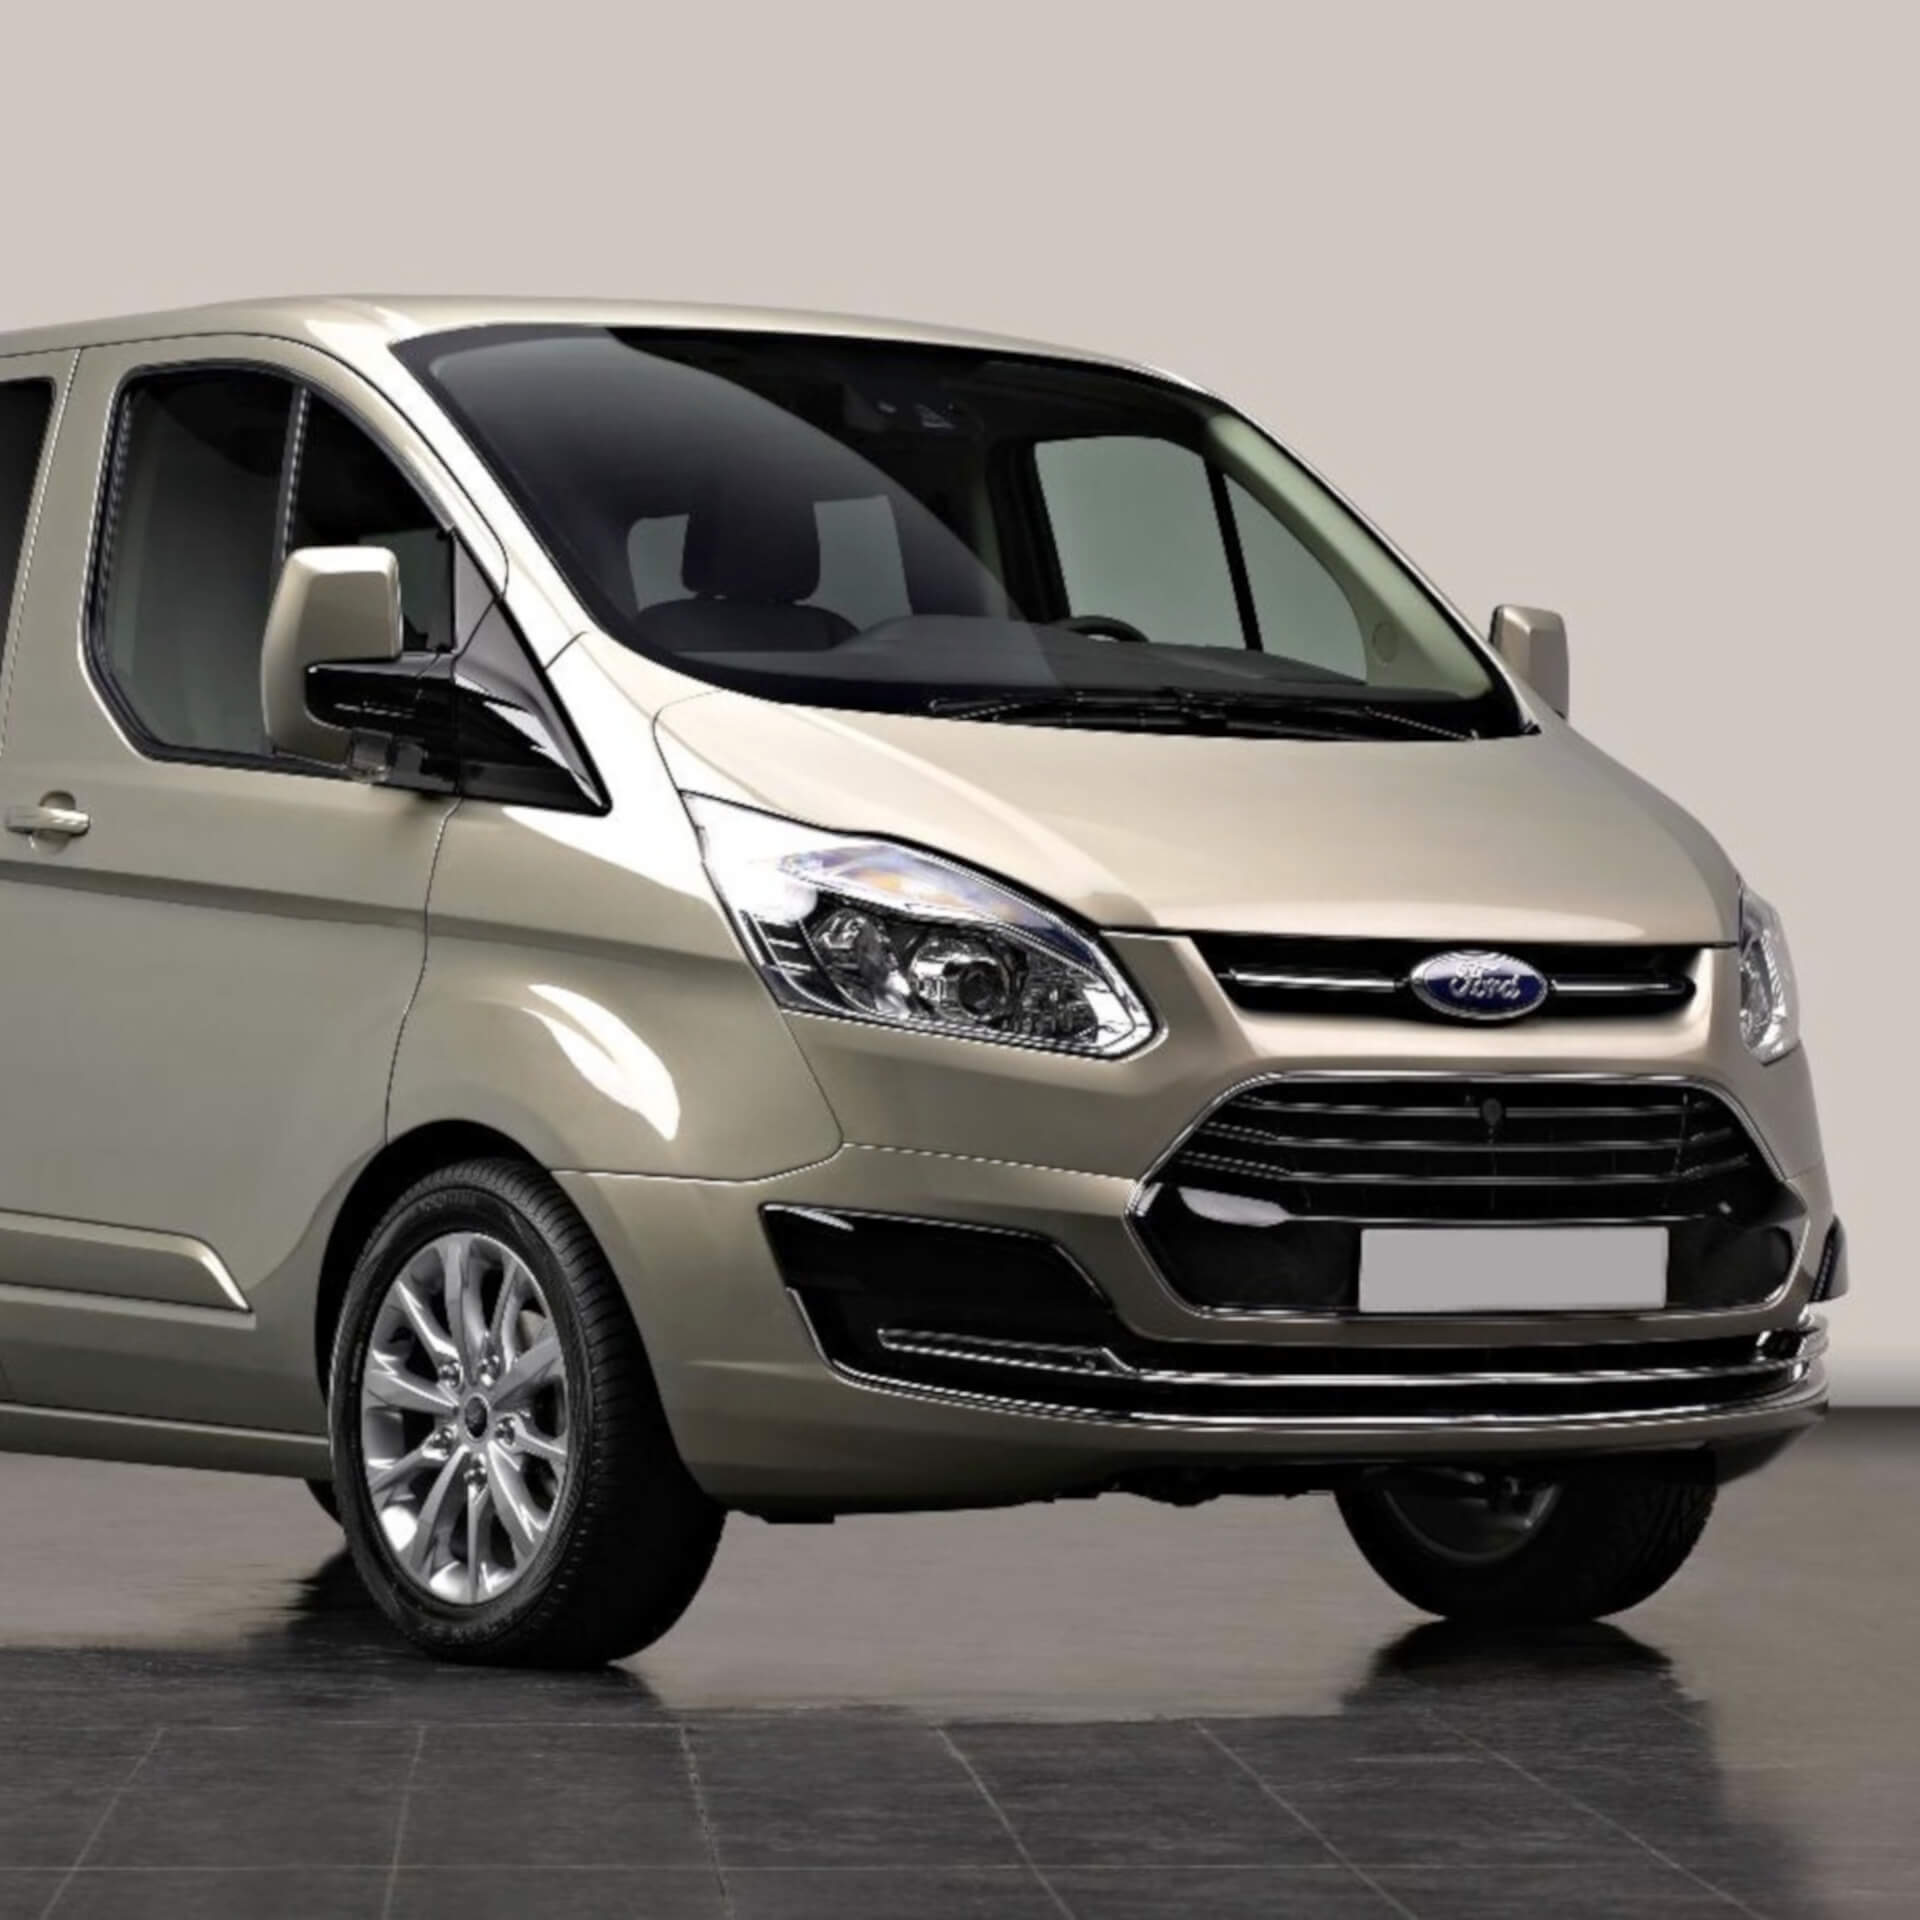 Direct4x4 accessories for Ford Transit vehicles with a photo of a Ford Transit Custom in a showroom